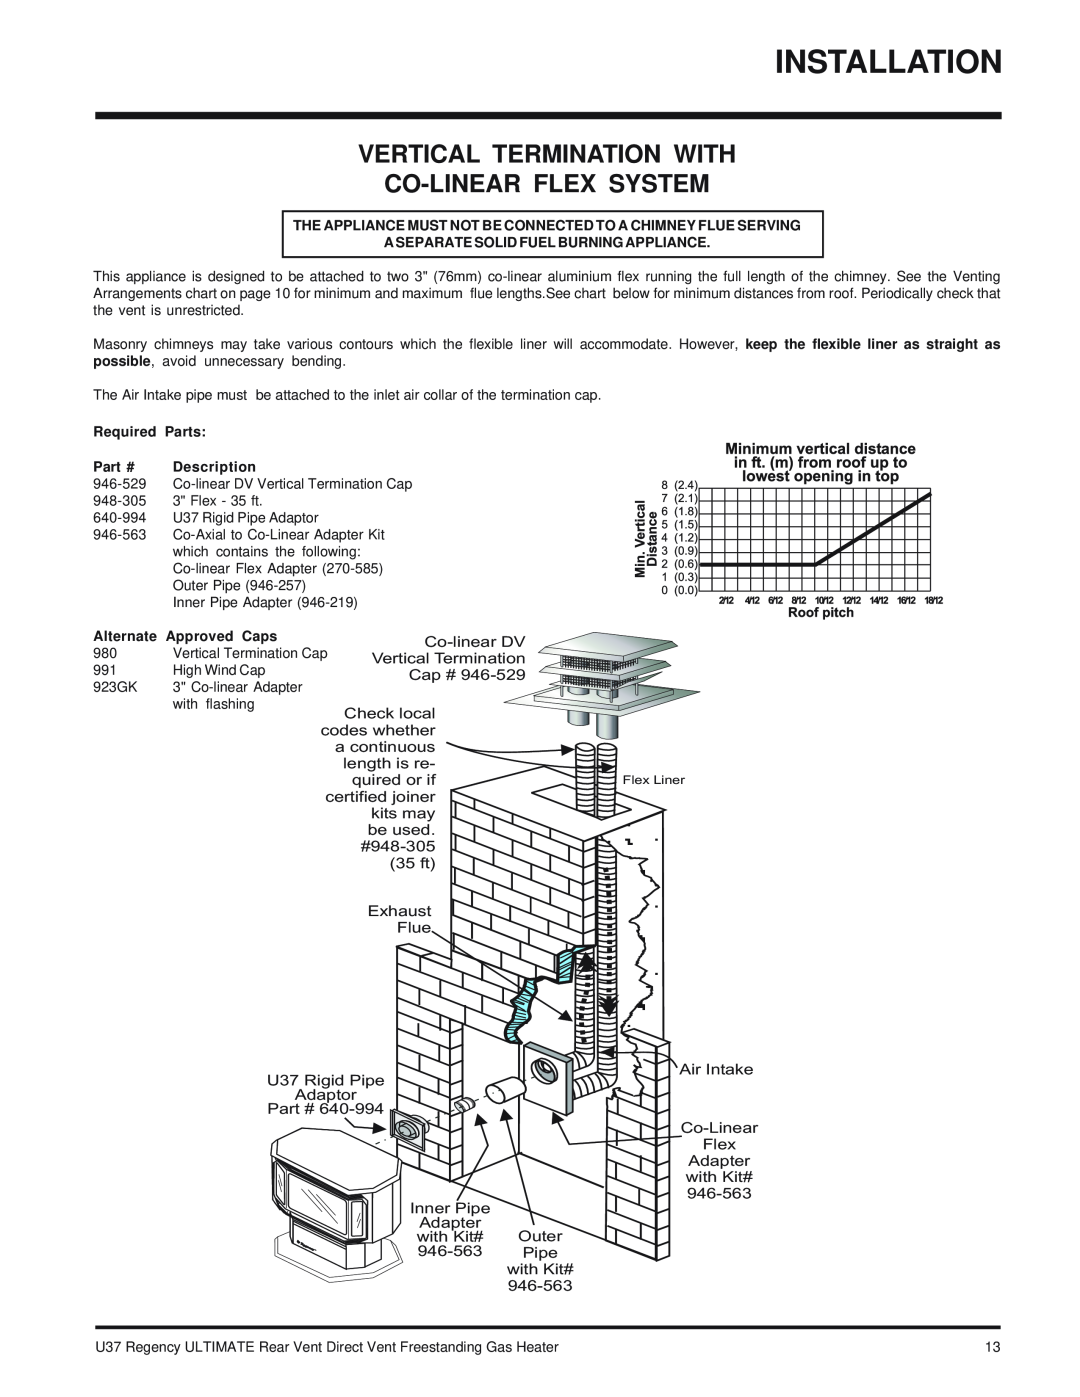 Regency U37-NG NATURAL GAS Installation, Vertical Termination With Co-Linearflex System, Required Parts Description 